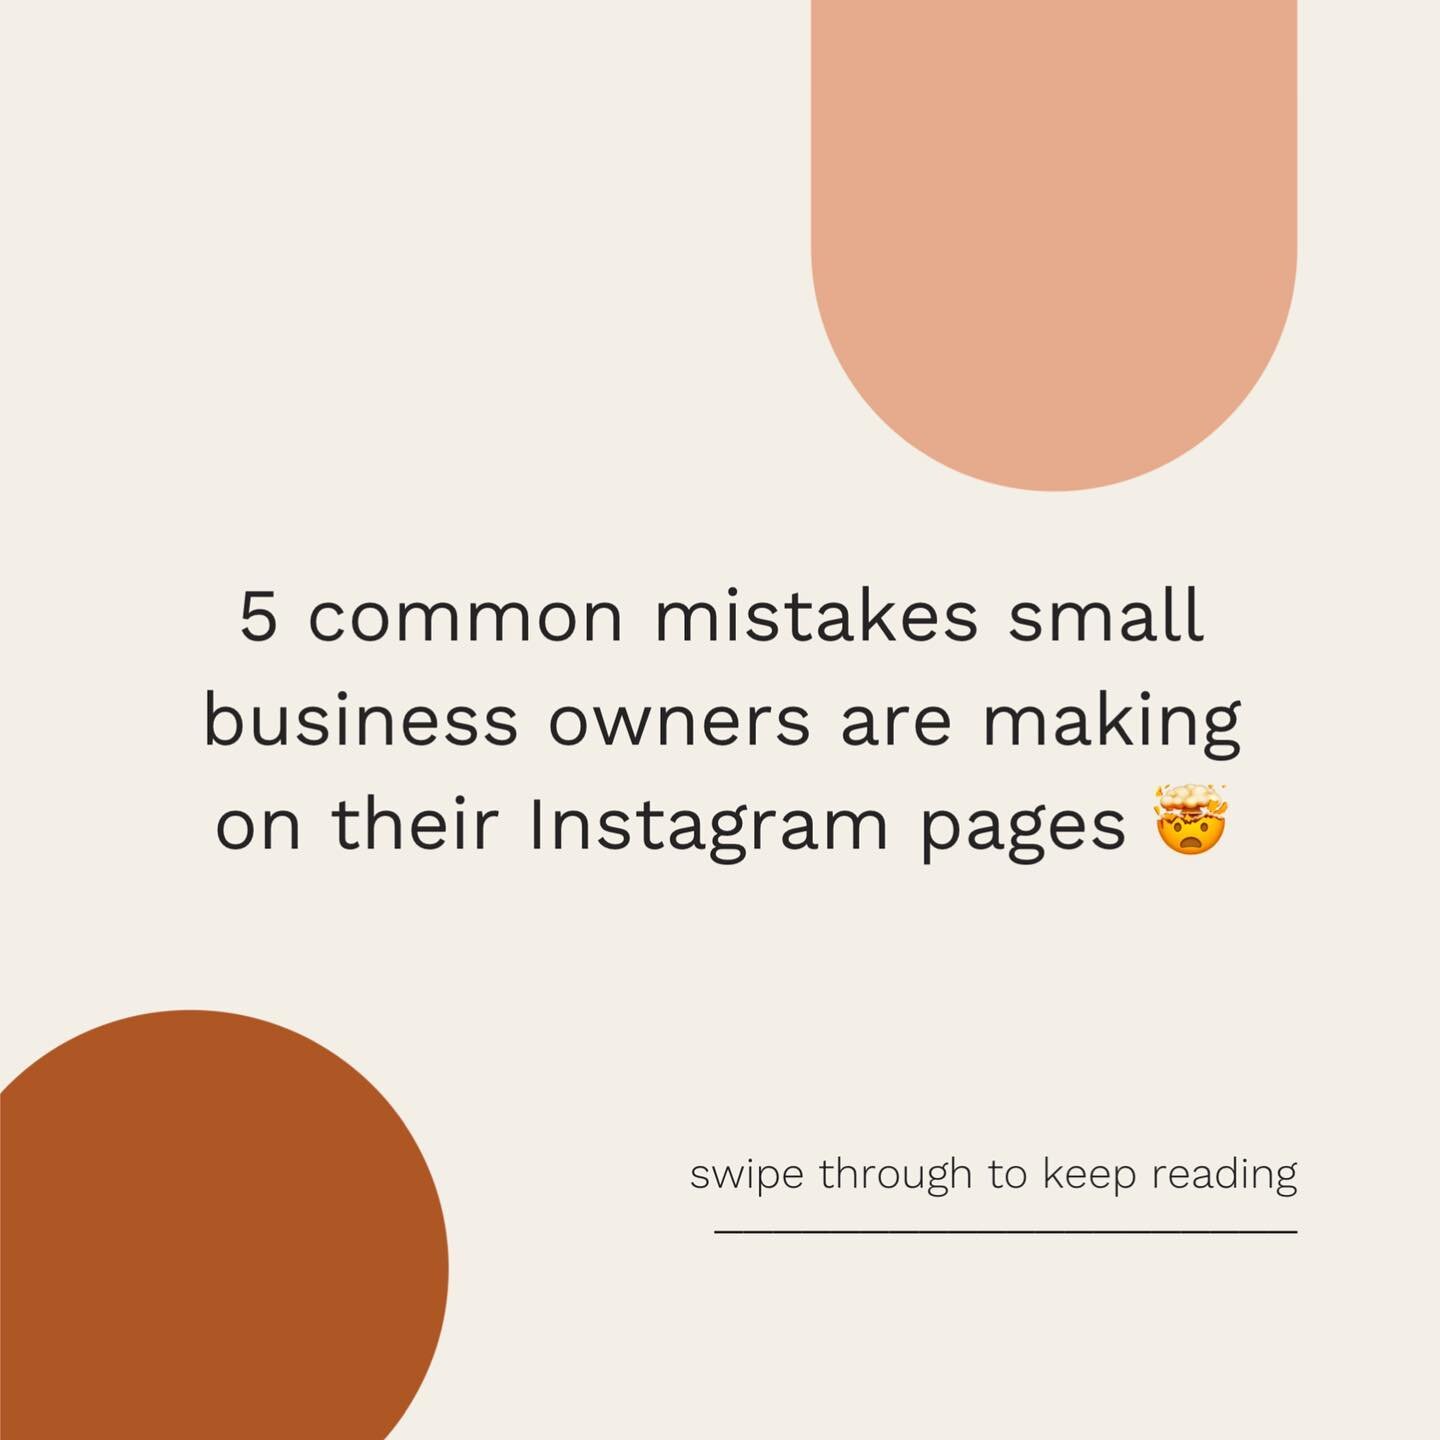 Here are 5 common mistakes small business owners are making on their Instagram pages 🤯⁣
⁣
If you&rsquo;re making any of these mistakes, it's time to step up your game and get your customers to come back to you 💯⁣
⁣
❌You&rsquo;re not utilizing hasht